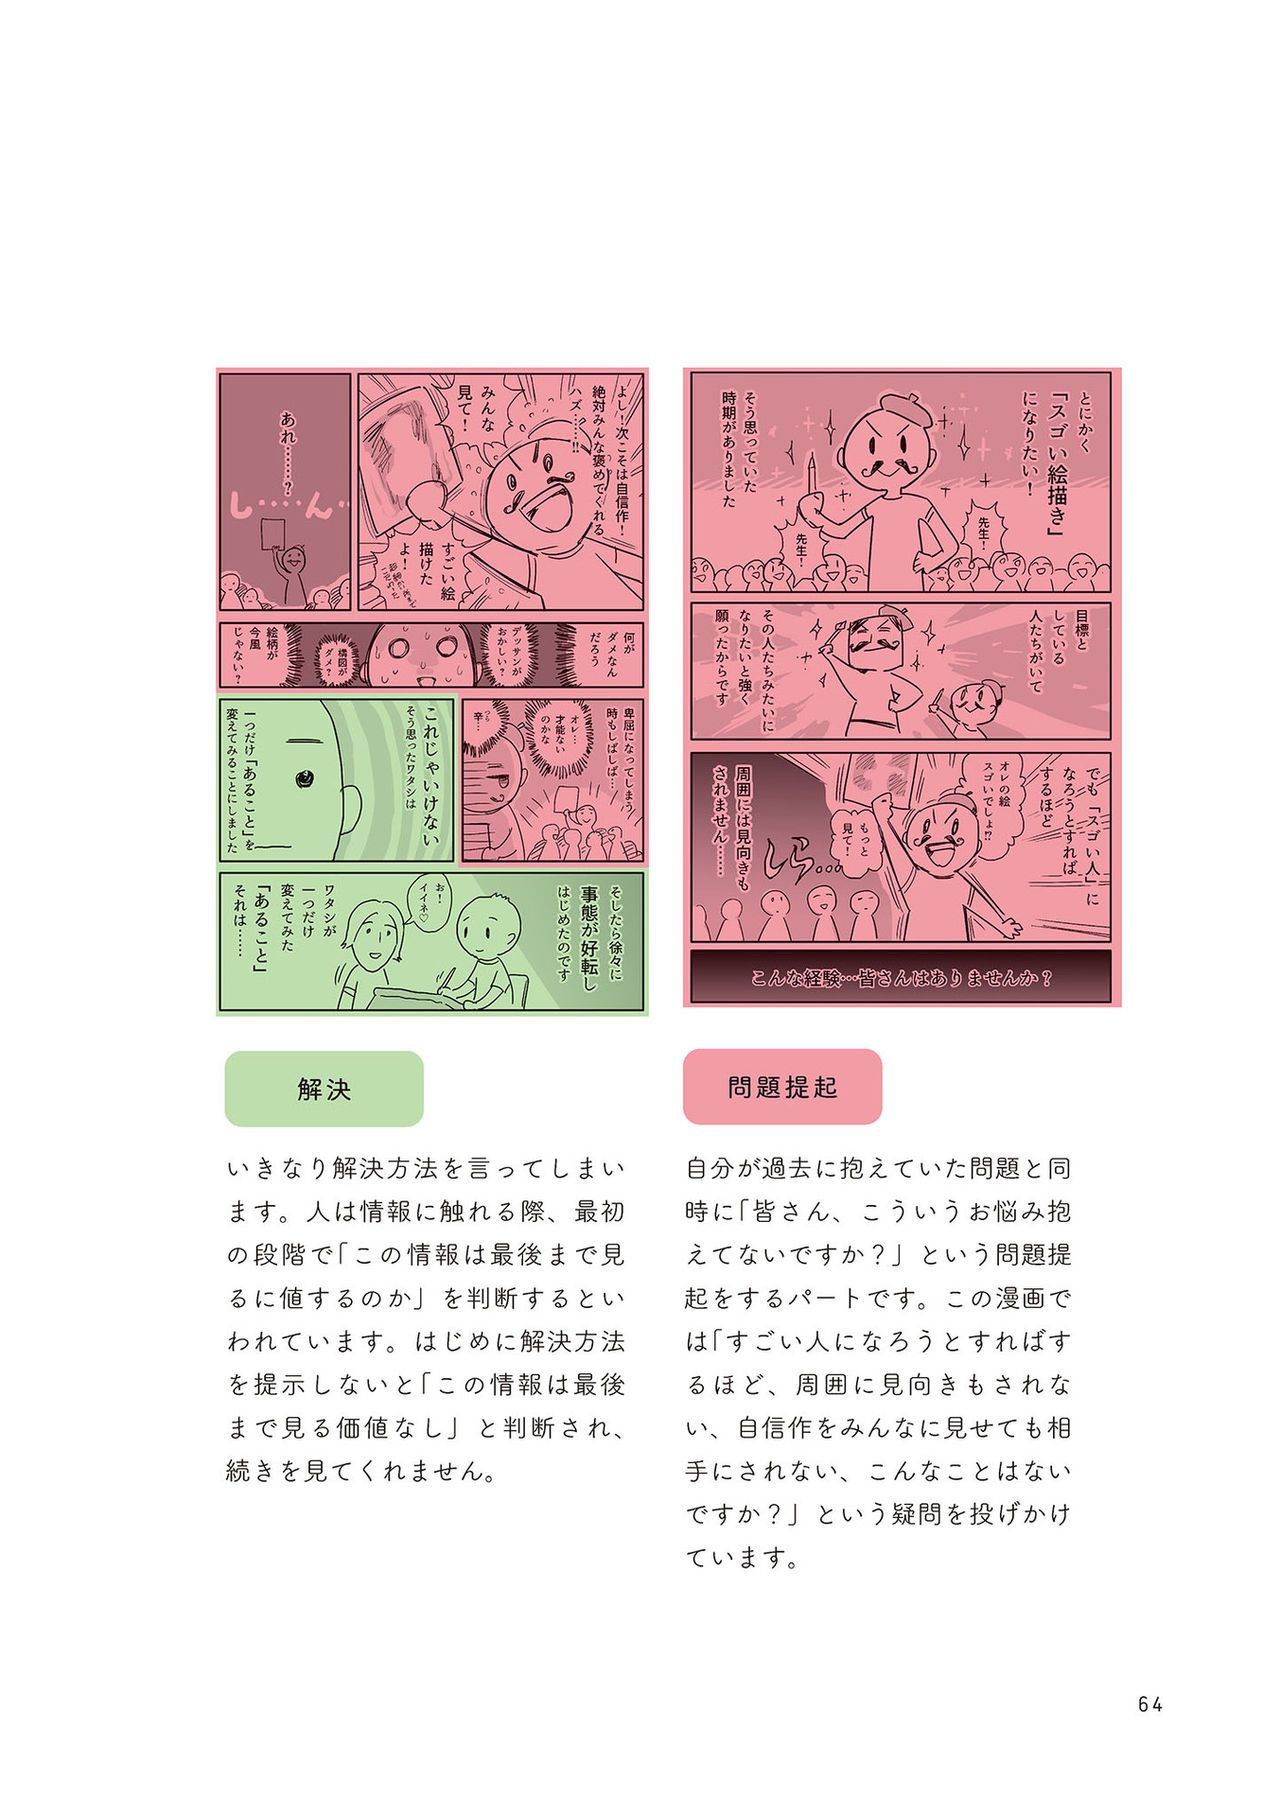 Prohibition of drawing well How to improve illustrations that are not smooth うまく描くの禁止 ツラくないイラスト上達法 65